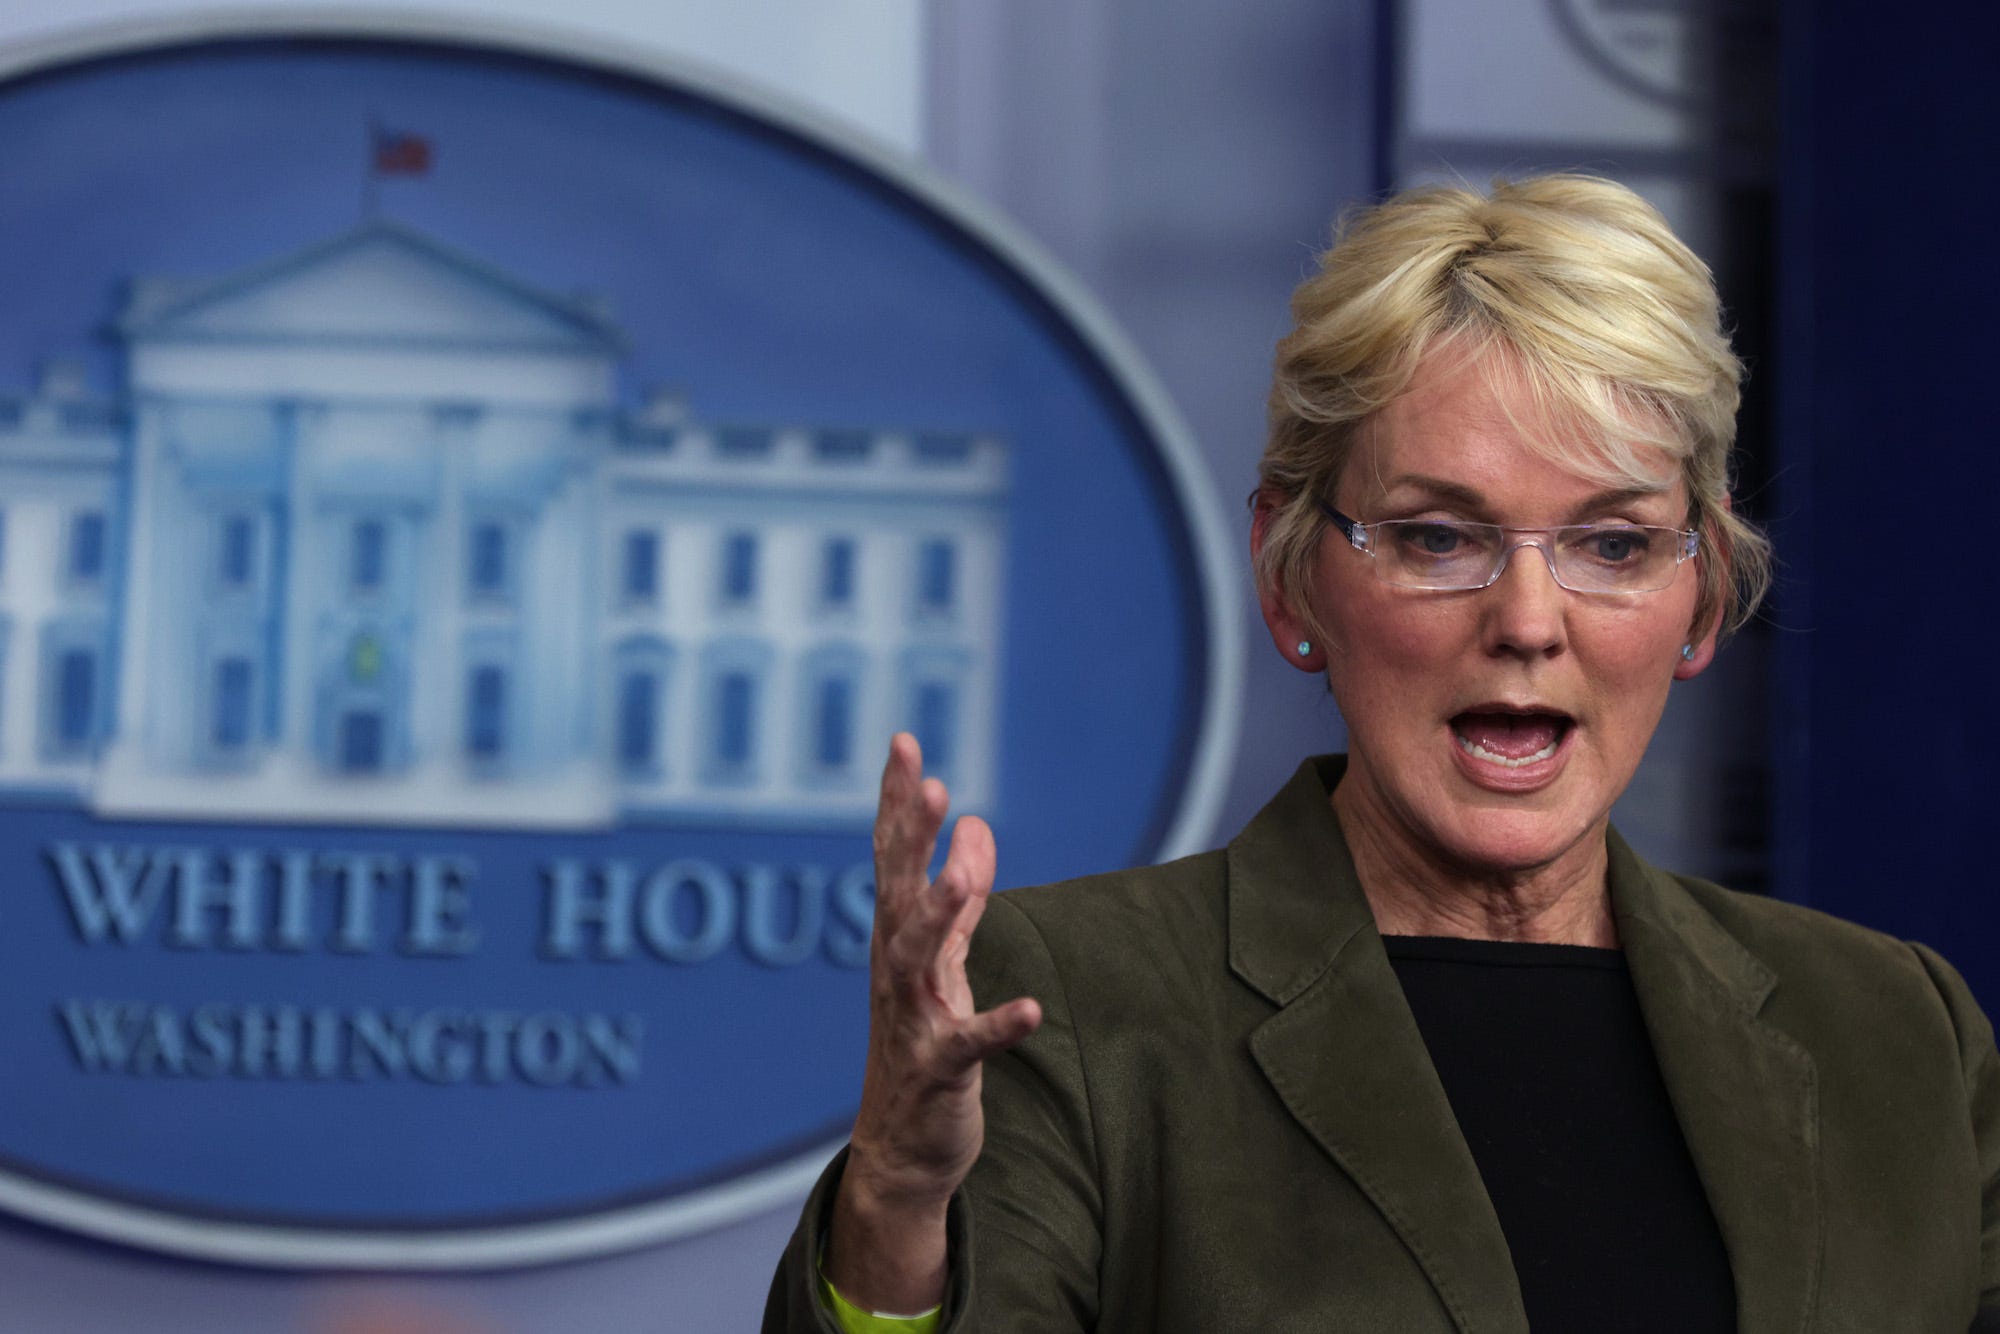 US Secretary of Energy Jennifer Granholm, her right hand raised to shoulder level, addresses reporters during a press conference in the White House briefing room.